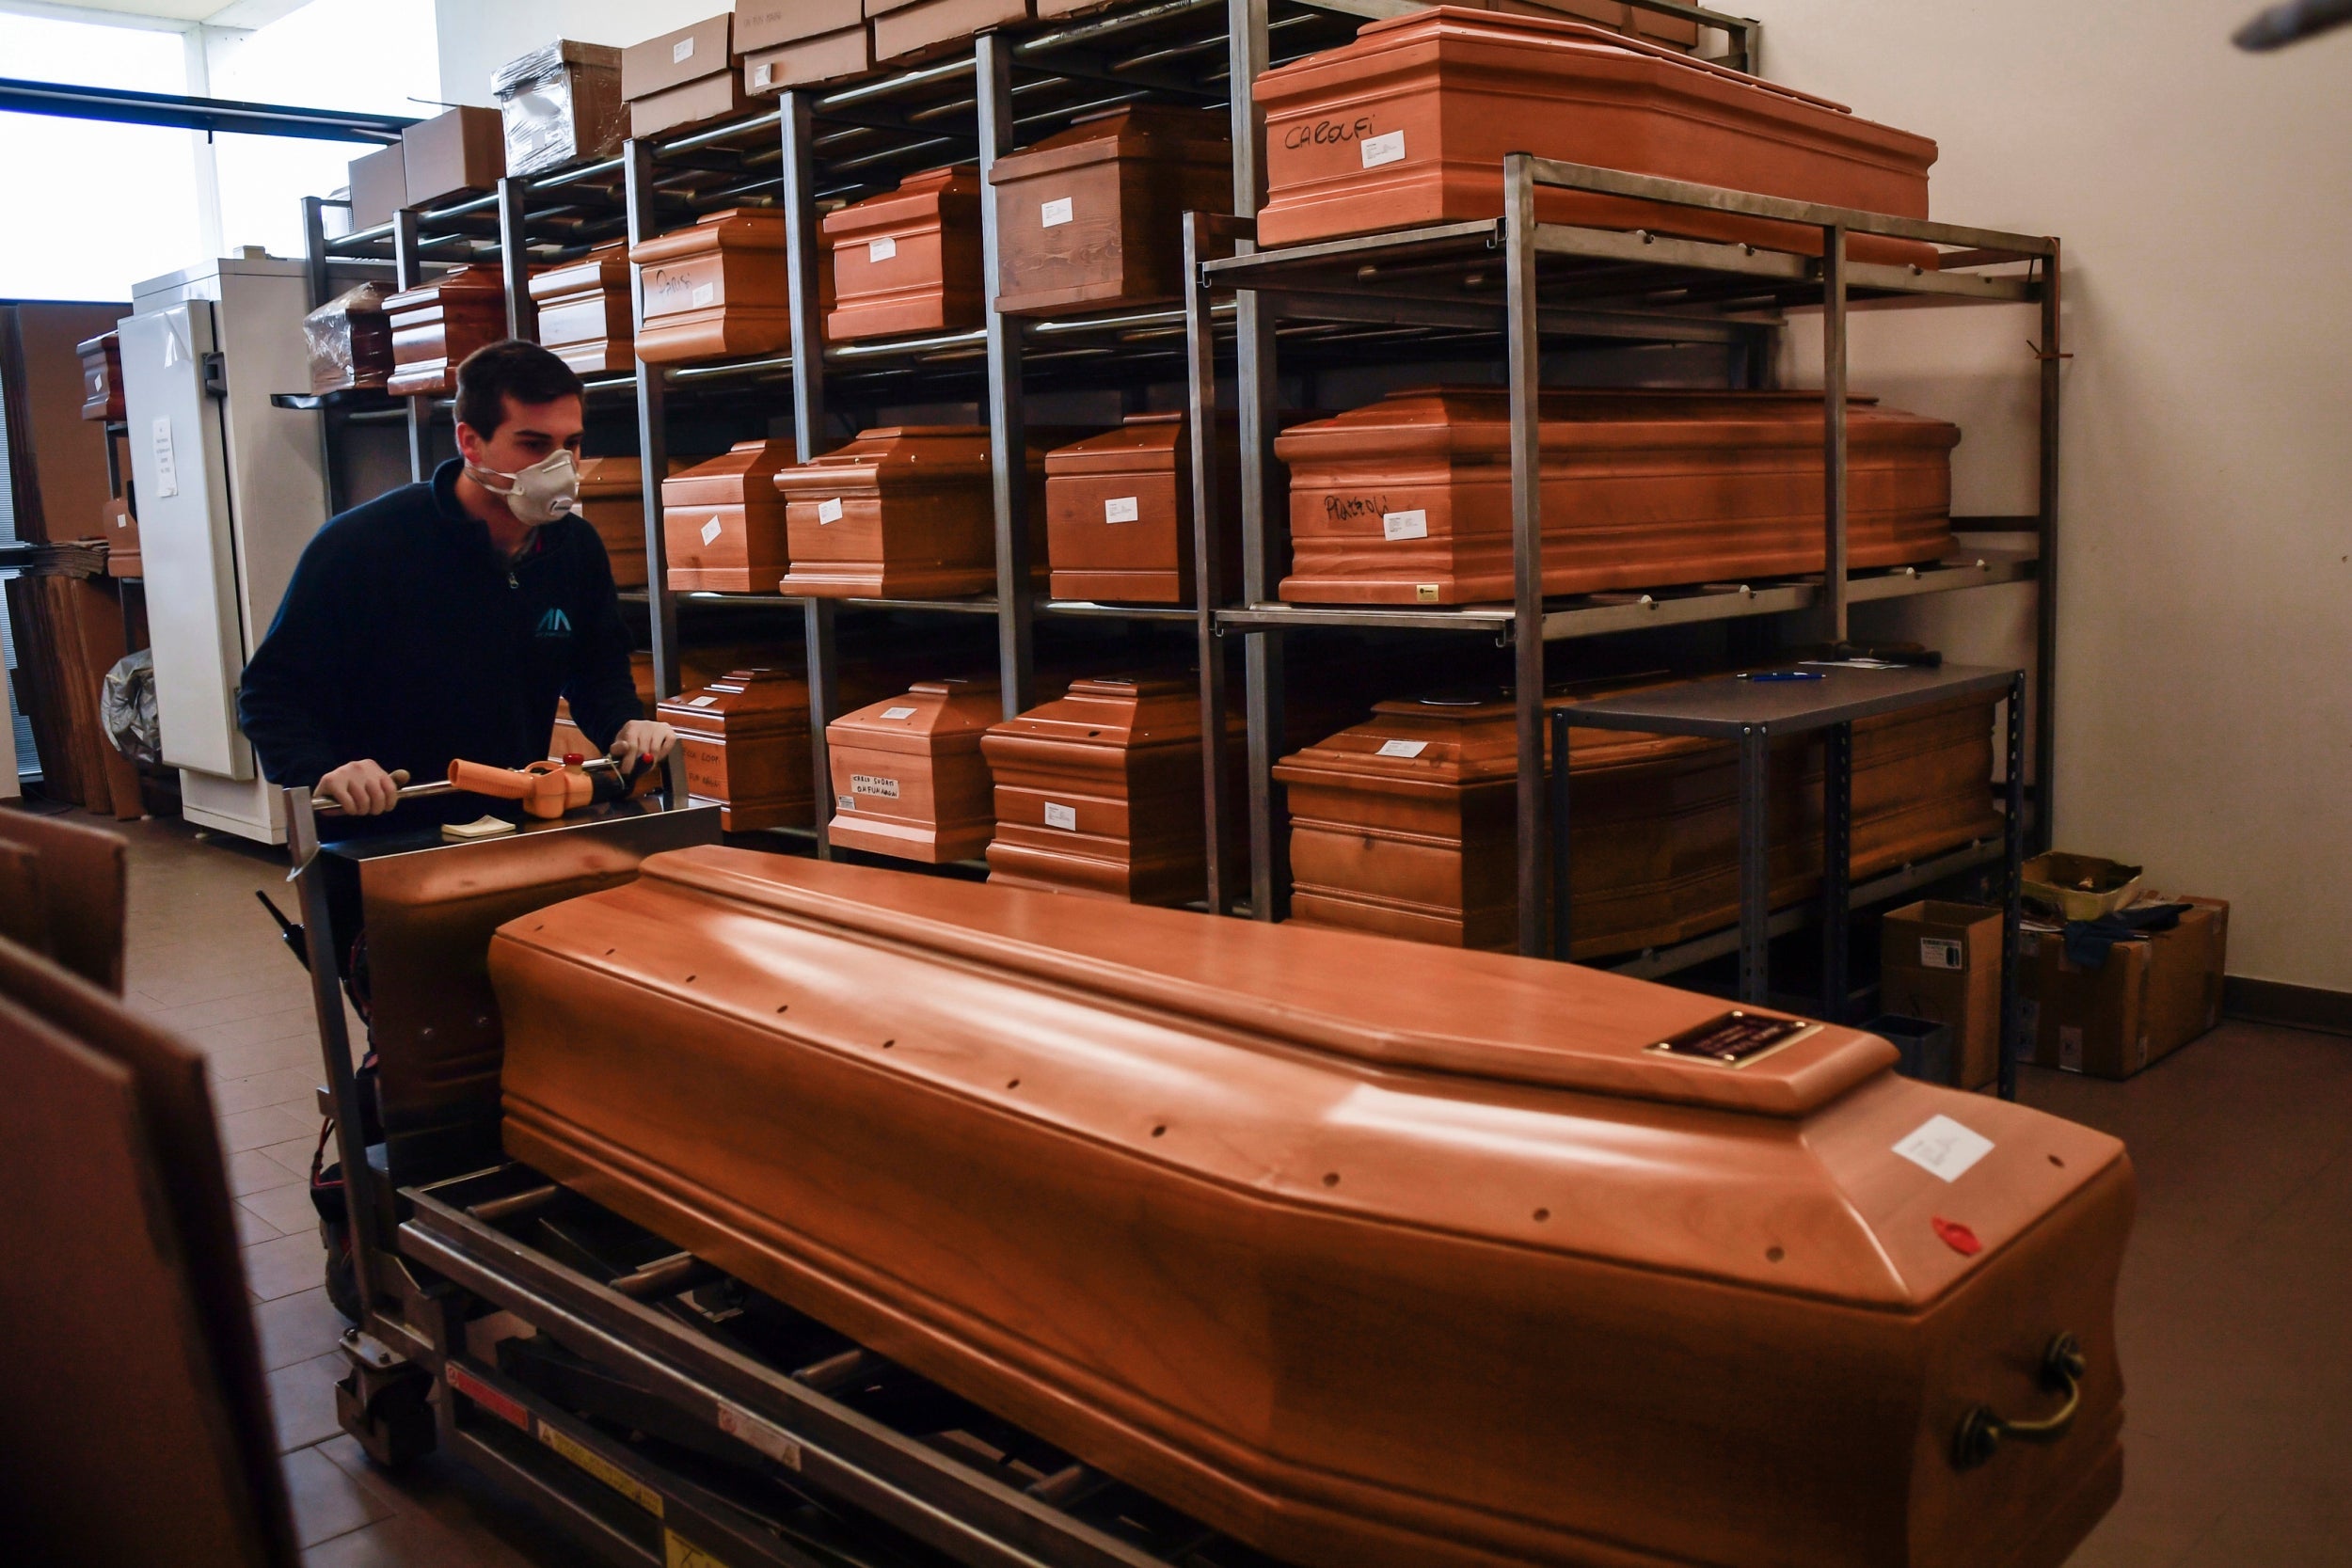 Worker moves a coffin in the Crematorium Temple of Piacenza, northern Italy